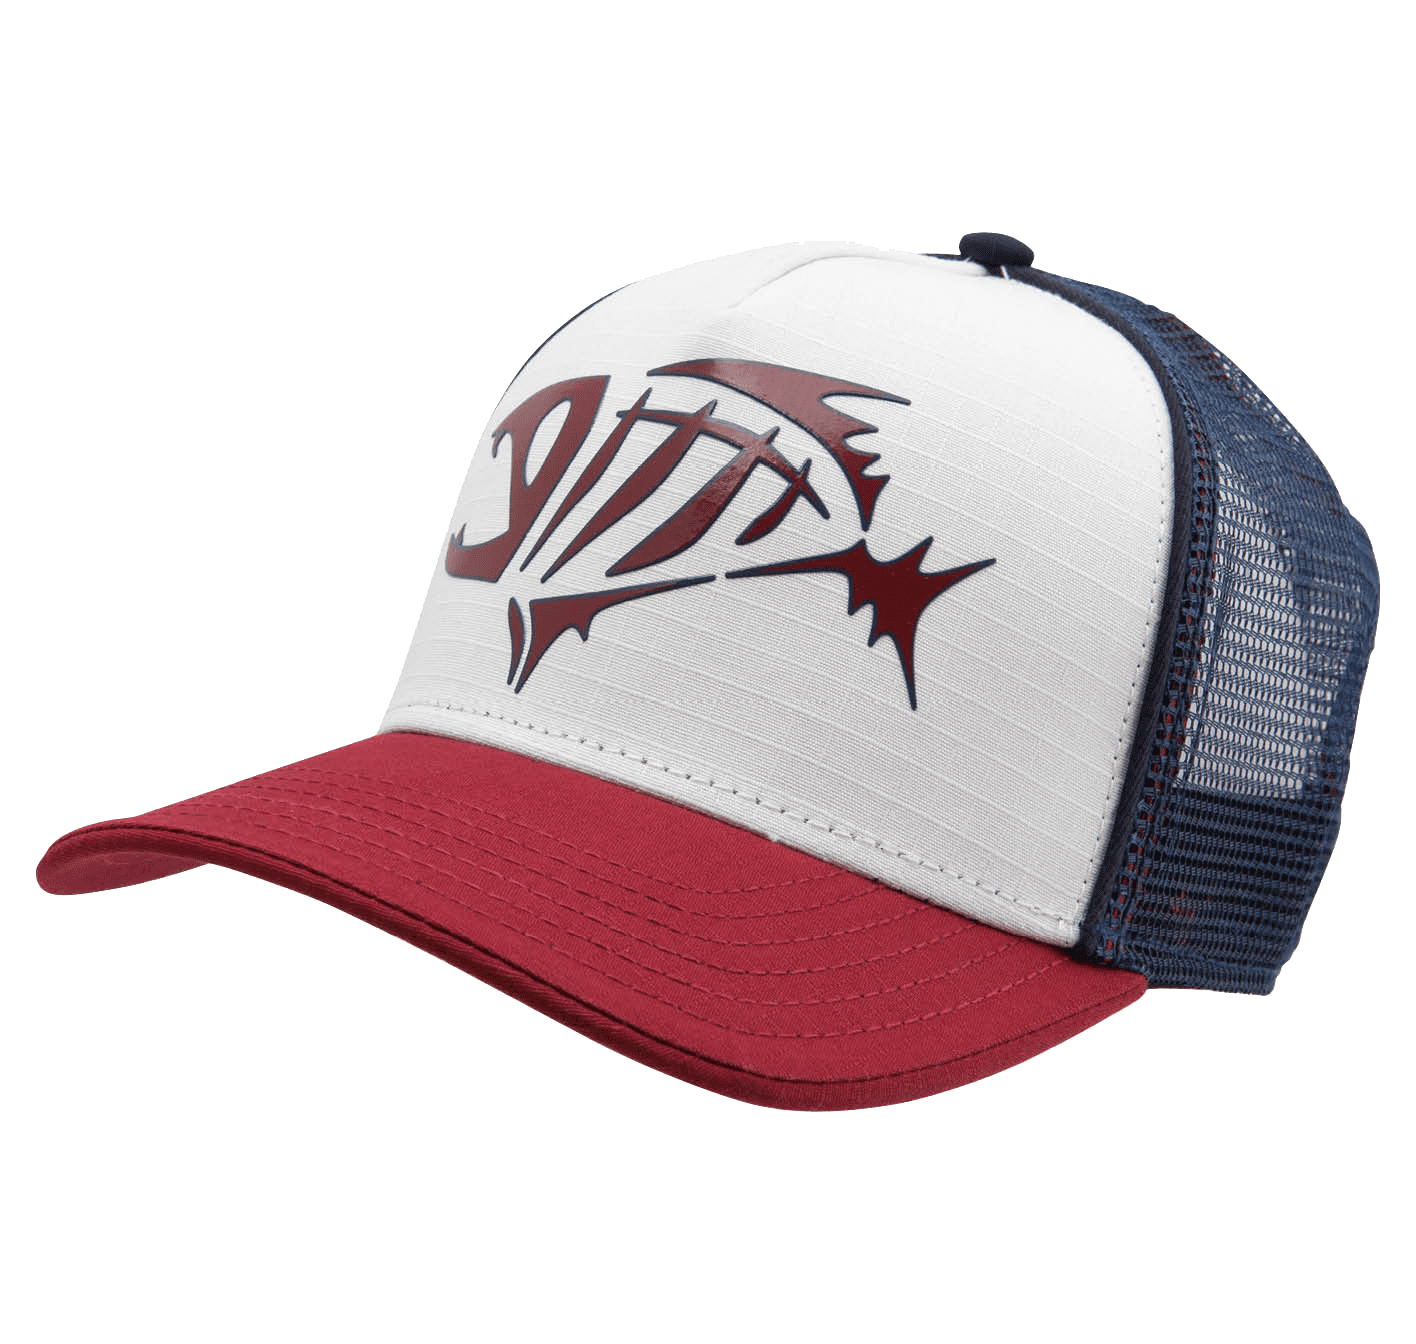 Gloomis Fishing Trucker Hat - USA, One Size Fits Most [GHATRIPUSA] 